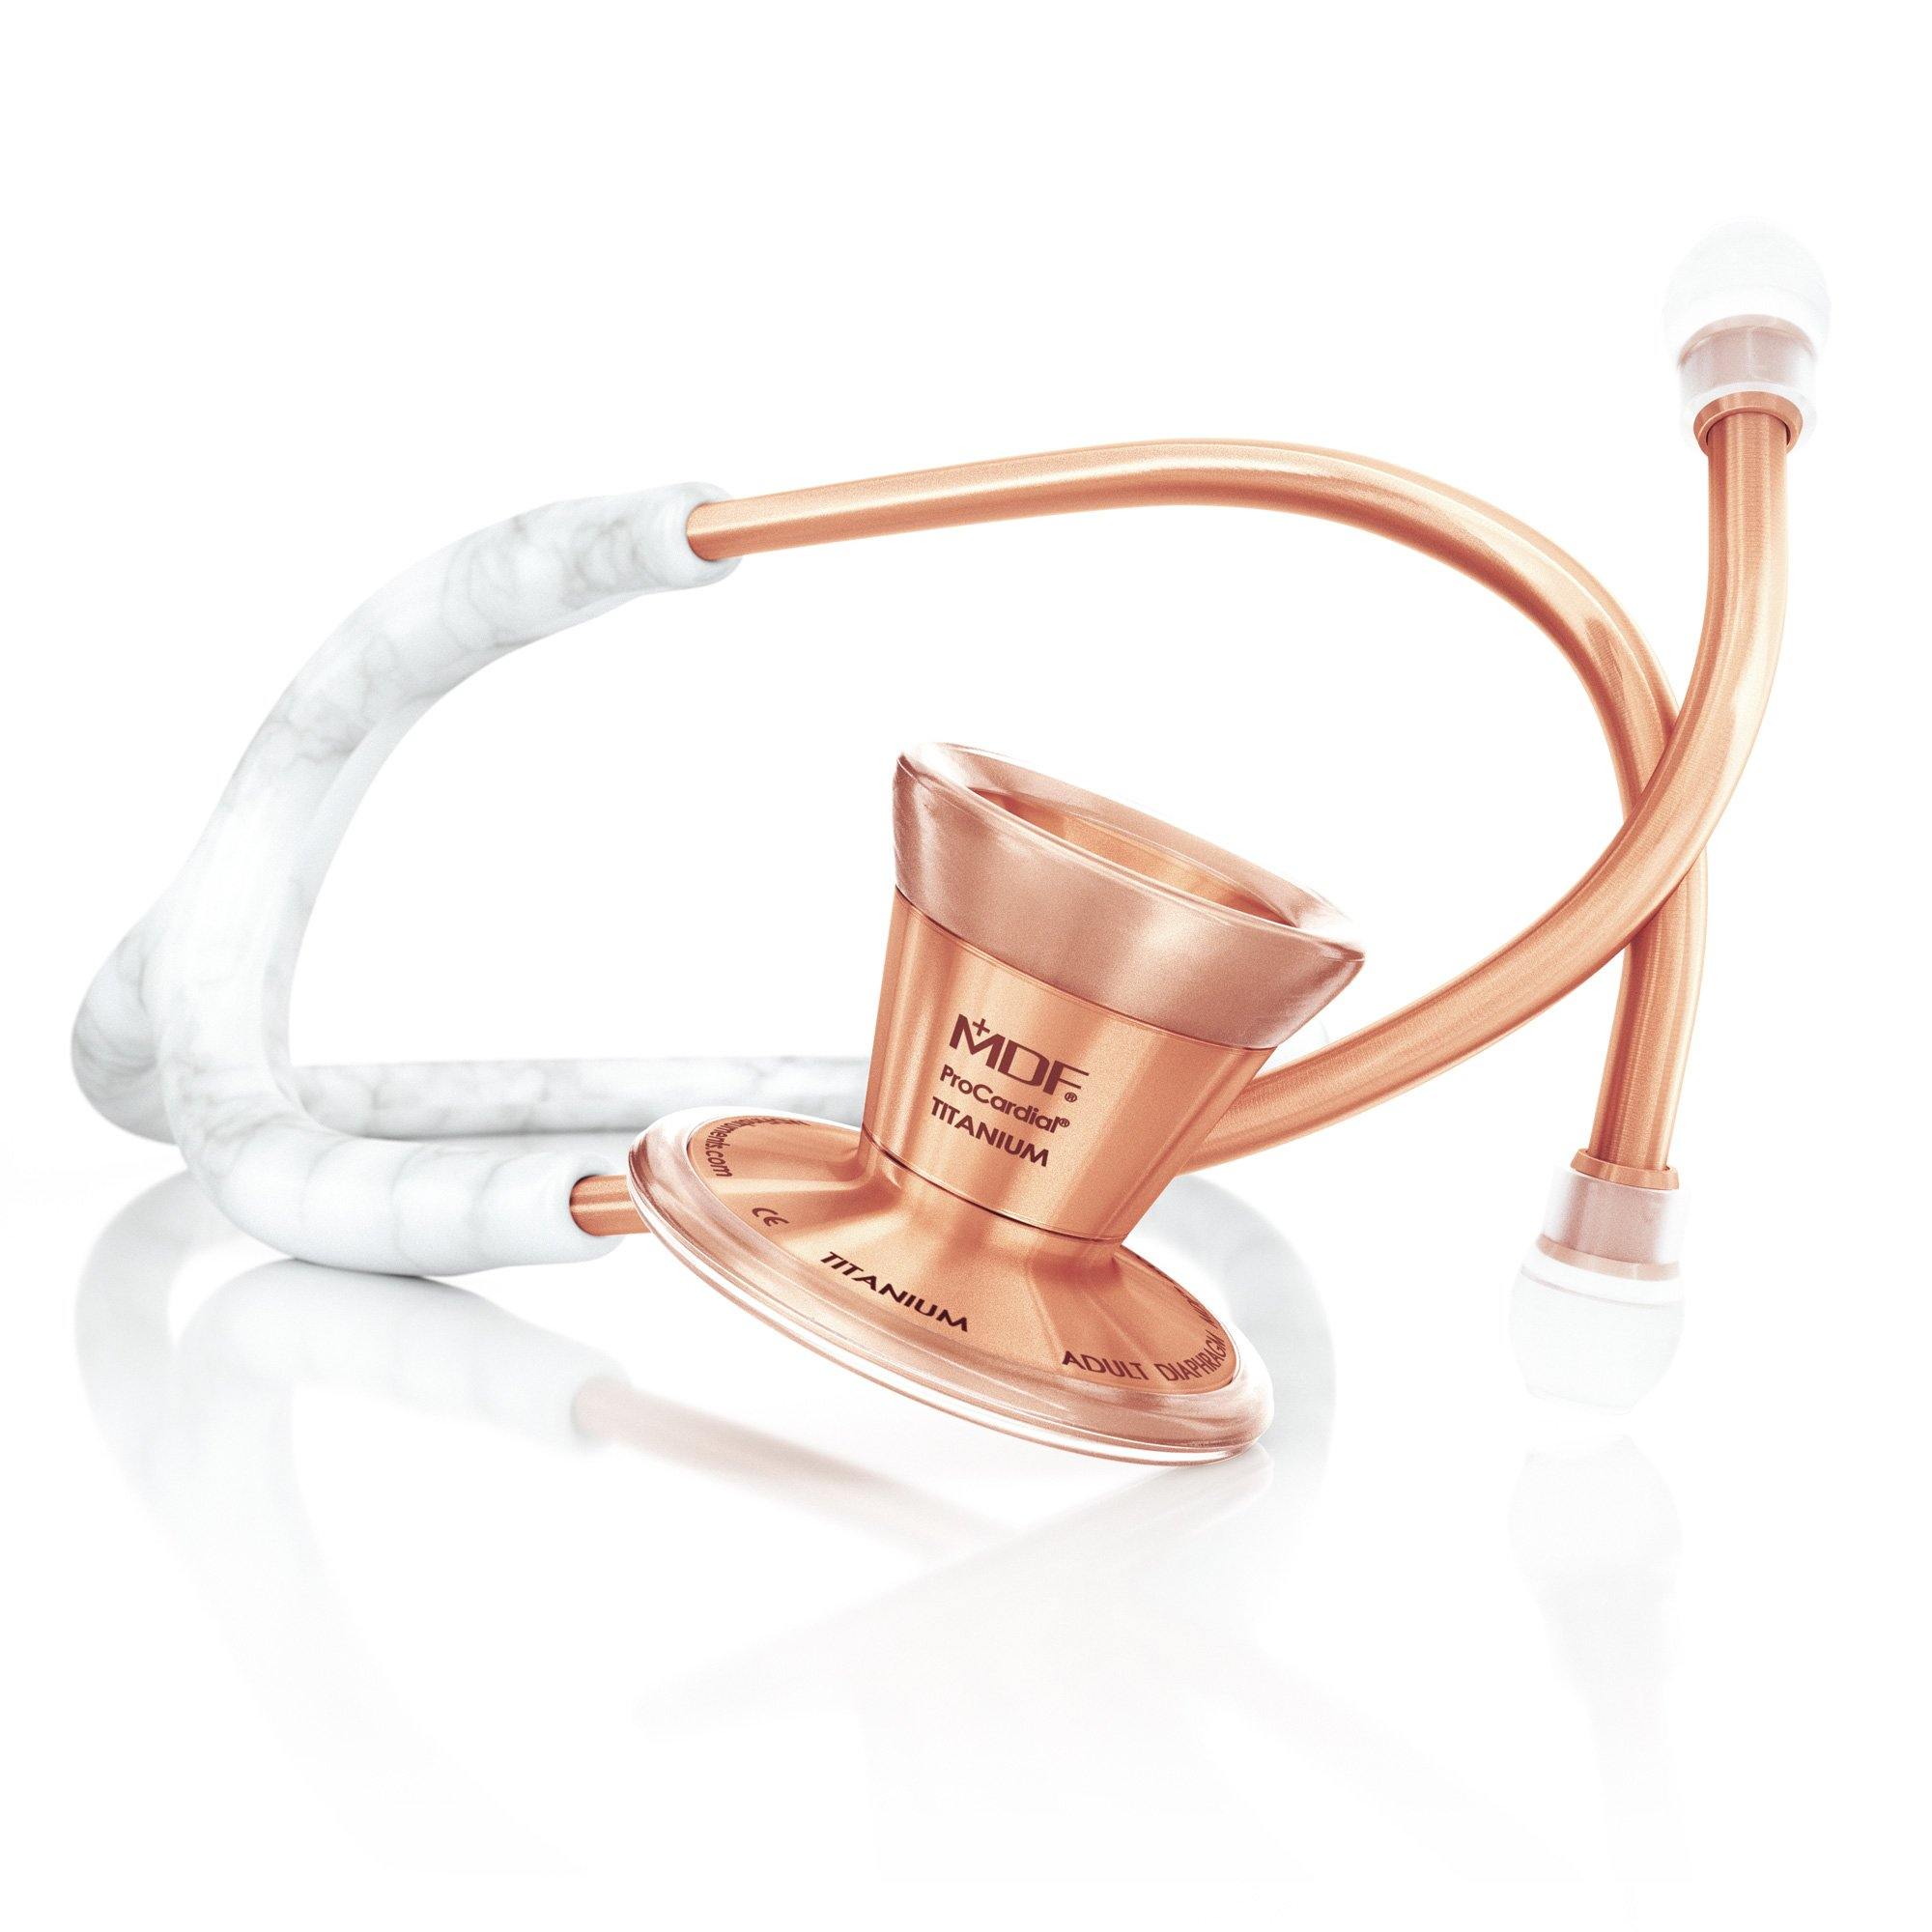 ProCardial® Titanium Cardiology Stethoscope - Carrera Marble/Rose Gold - MDF Instruments Official Store - No - Stethoscope